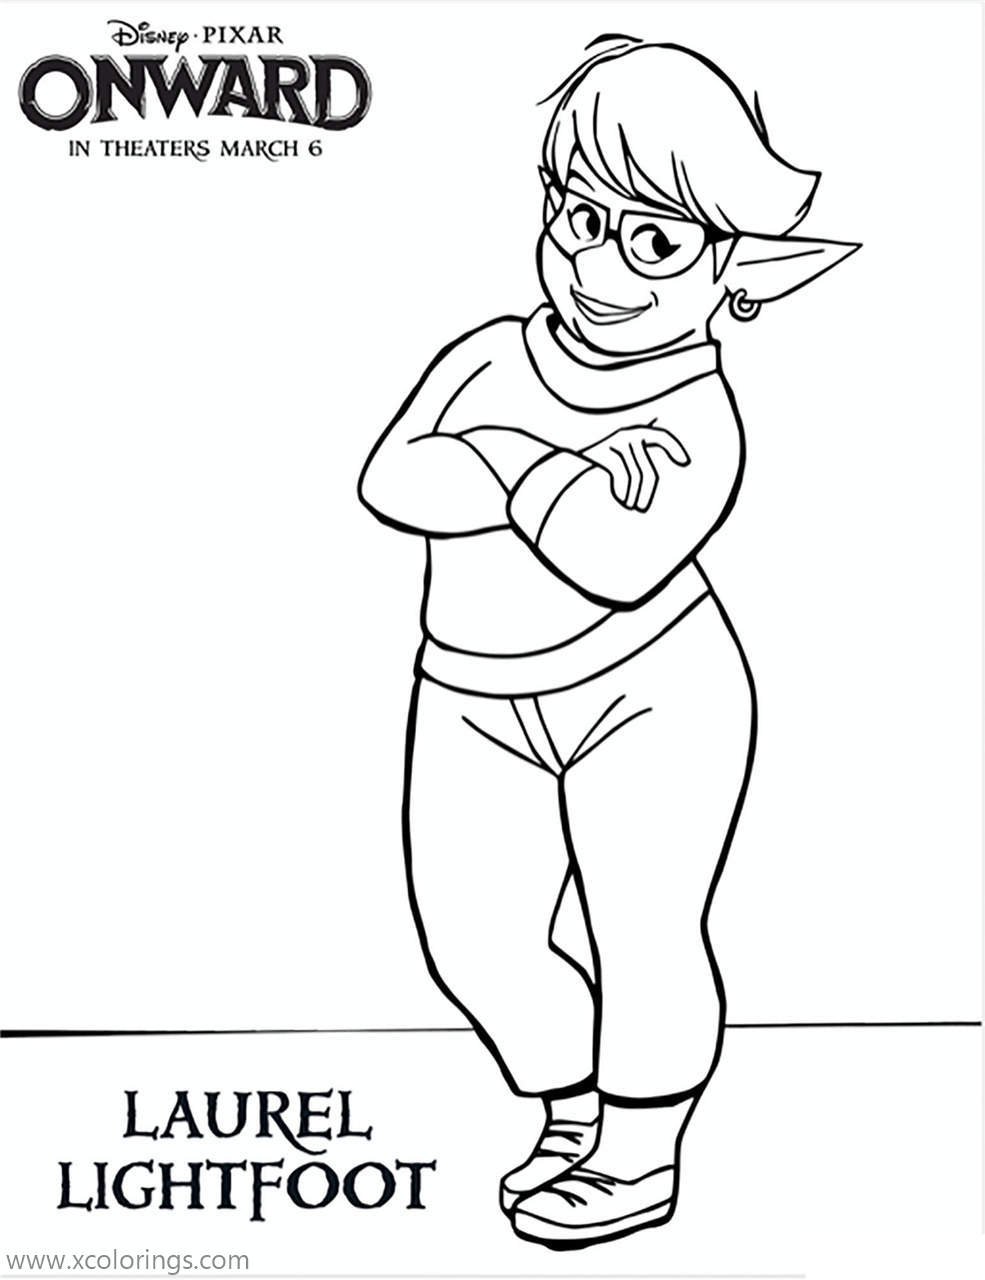 Free Laurel Lightfoot from Onward Coloring Pages printable